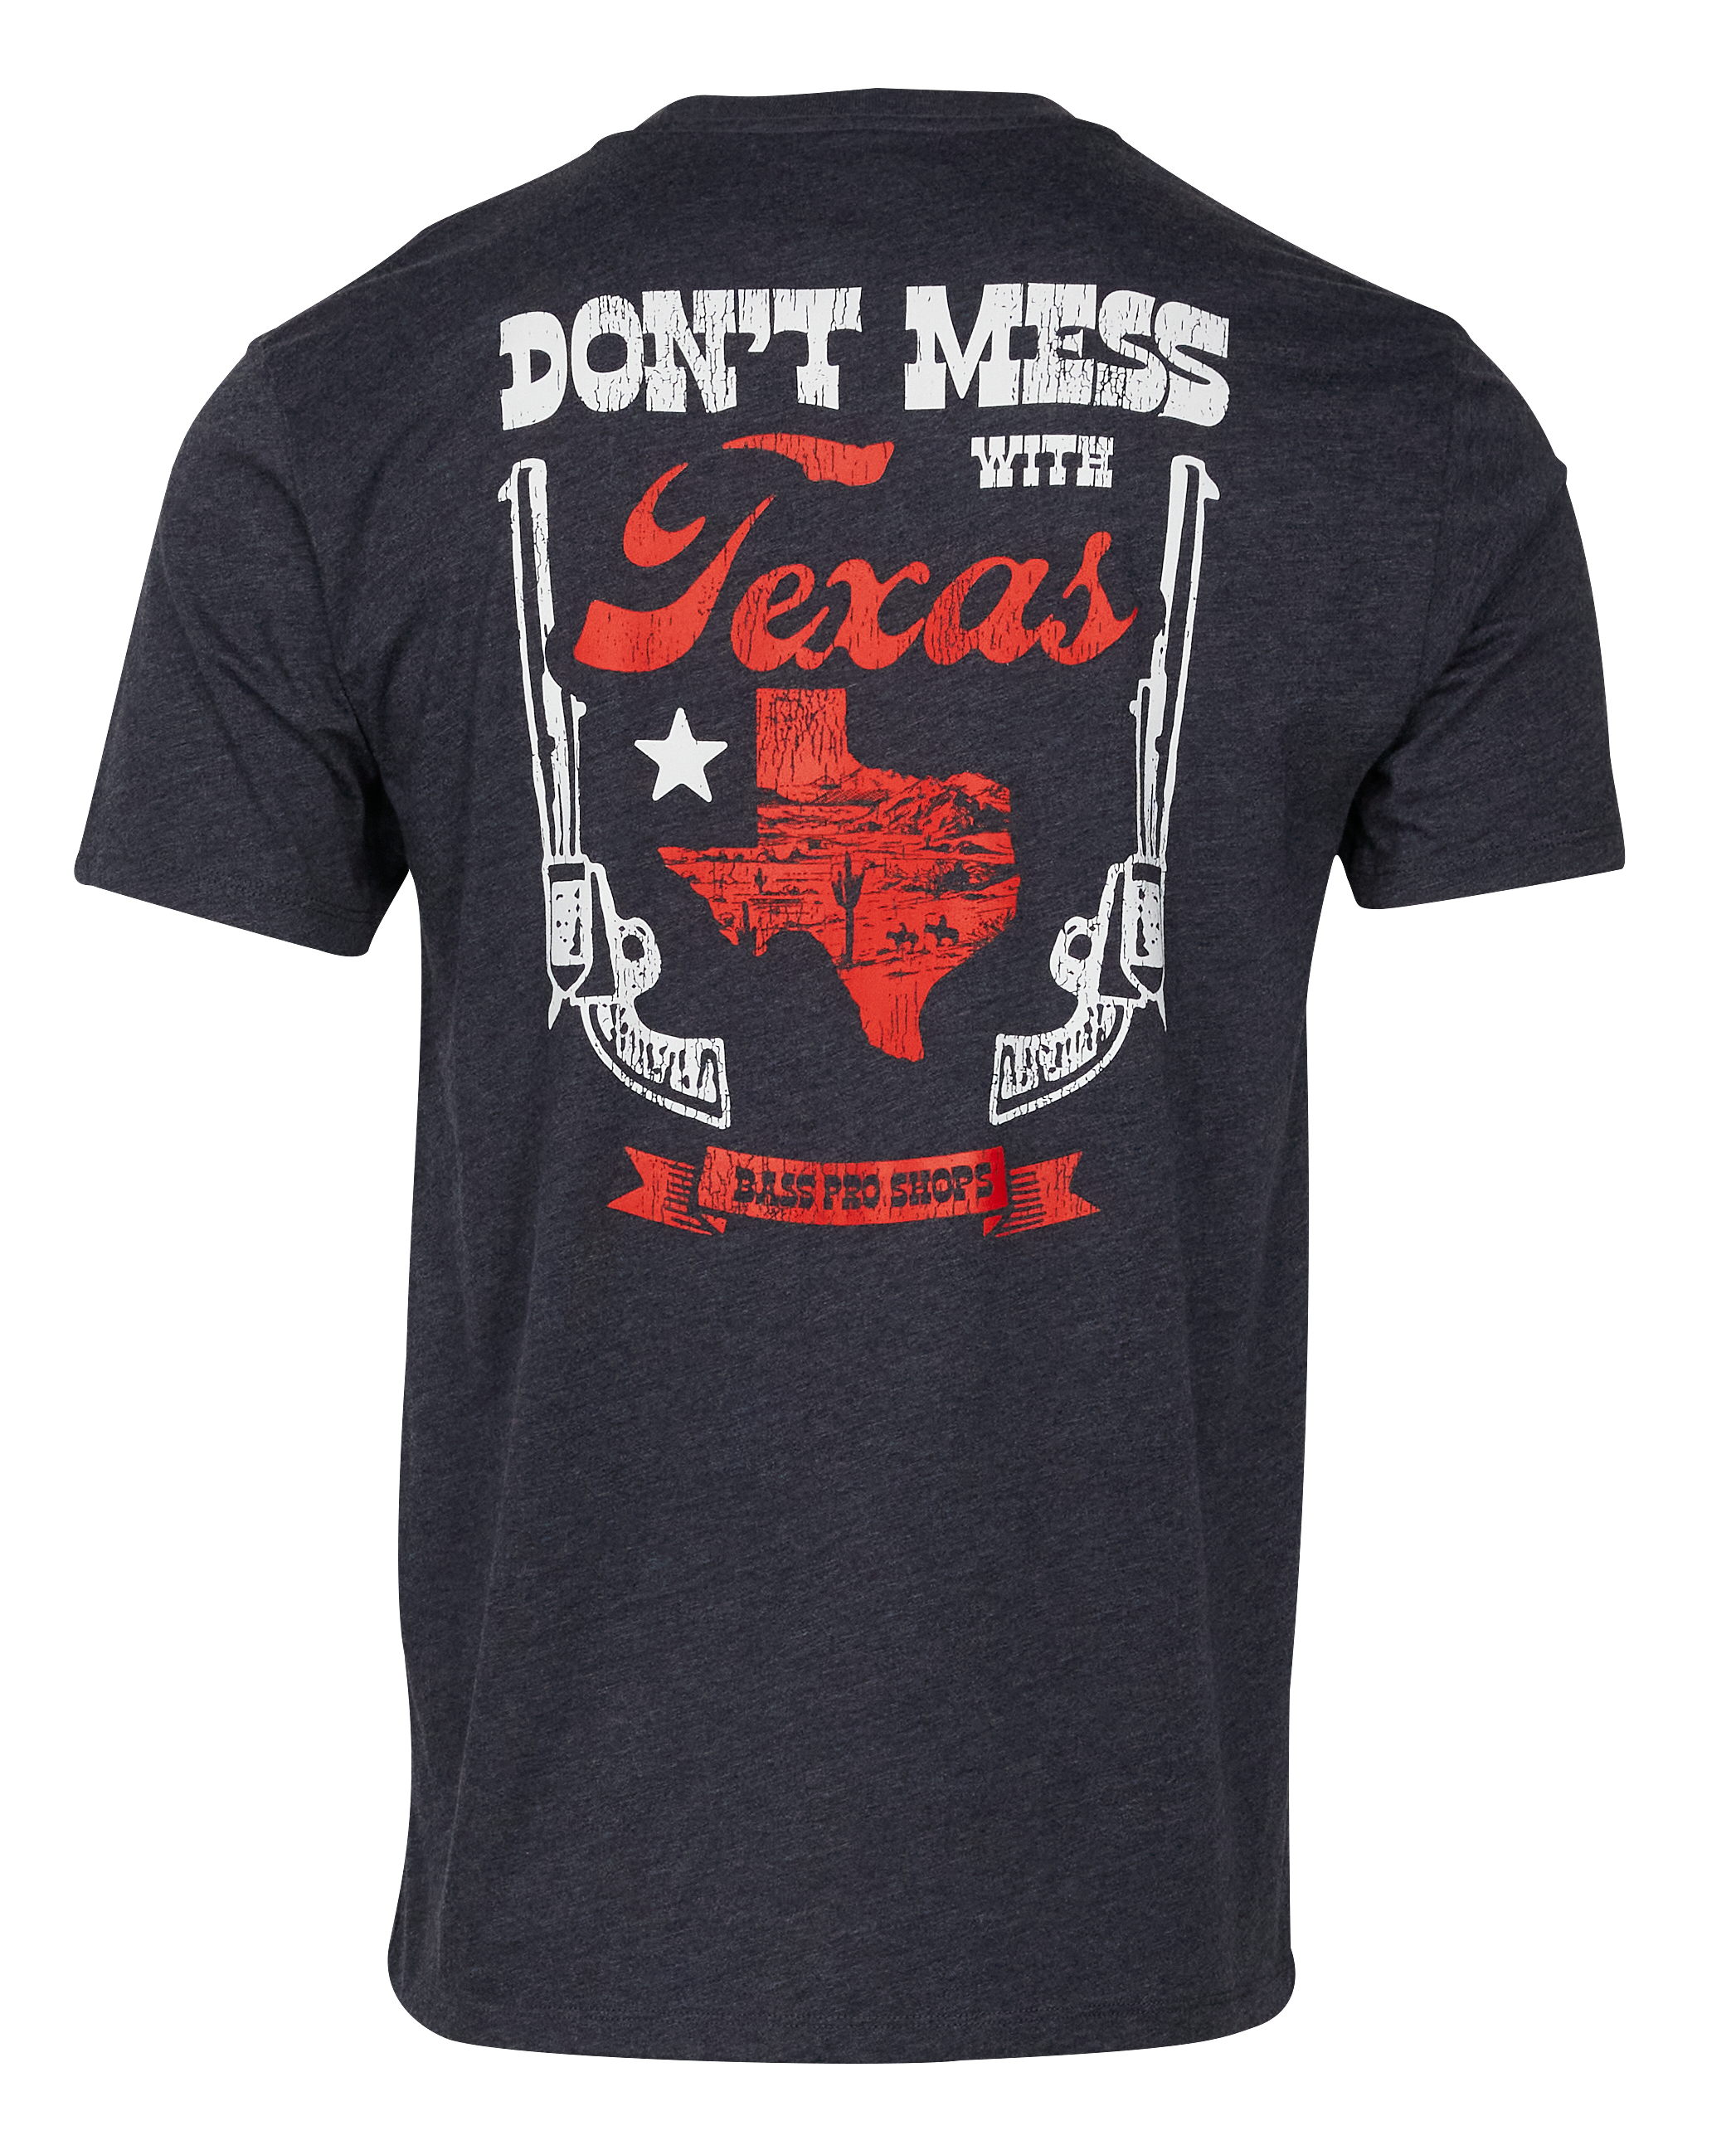 Bass Pro Shops Don't Mess With Texas Short-Sleeve T-Shirt for Men